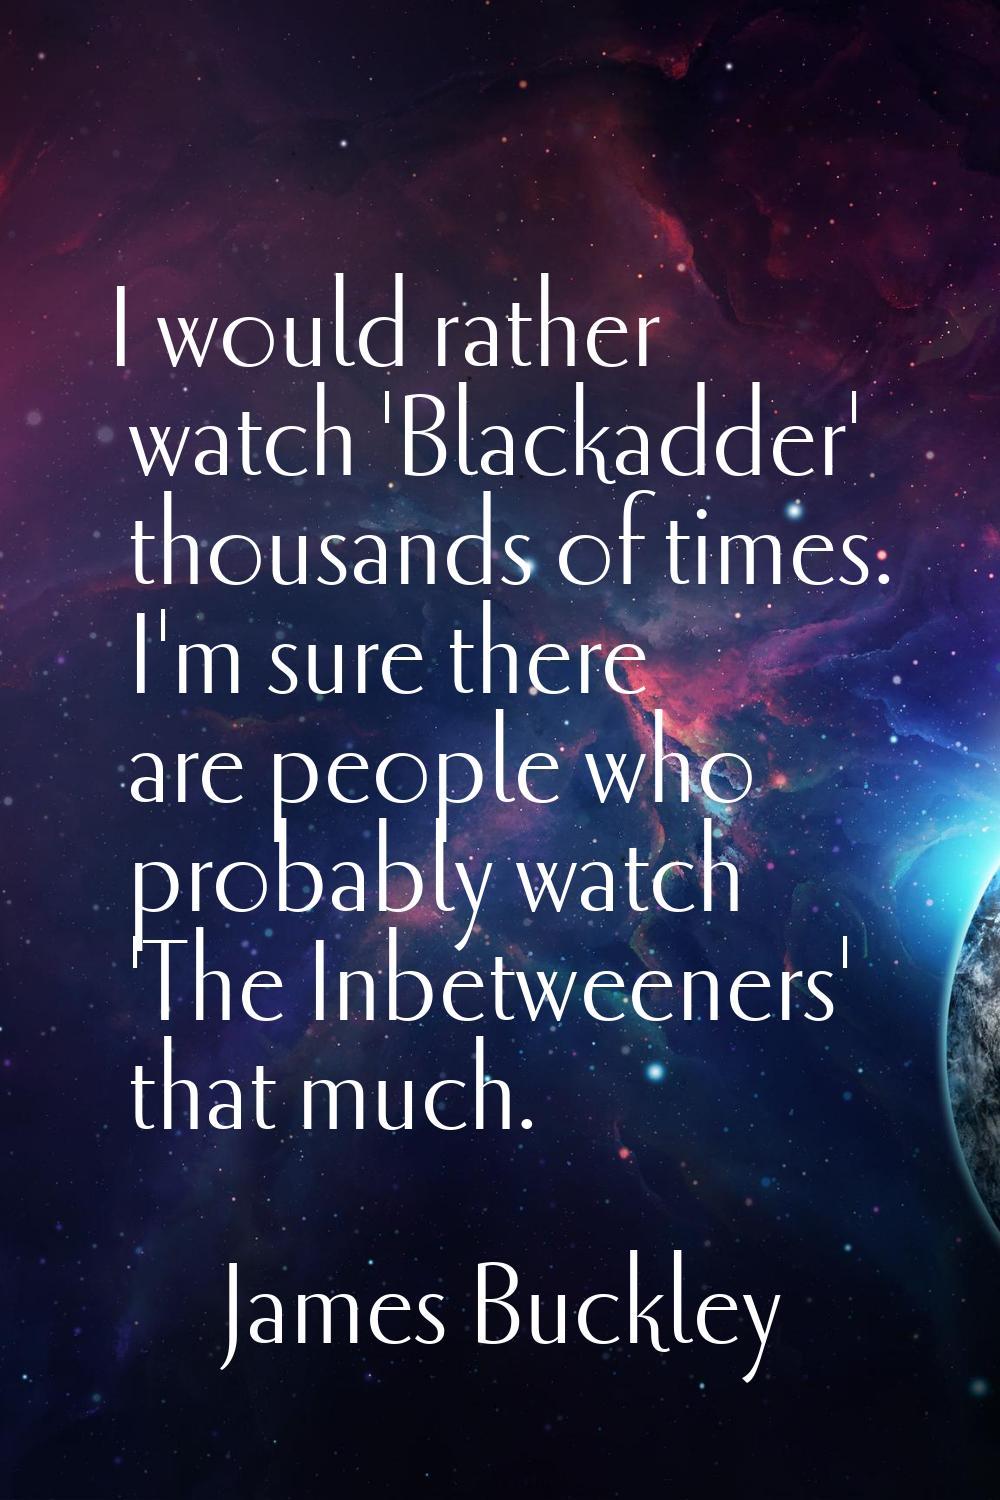 I would rather watch 'Blackadder' thousands of times. I'm sure there are people who probably watch 